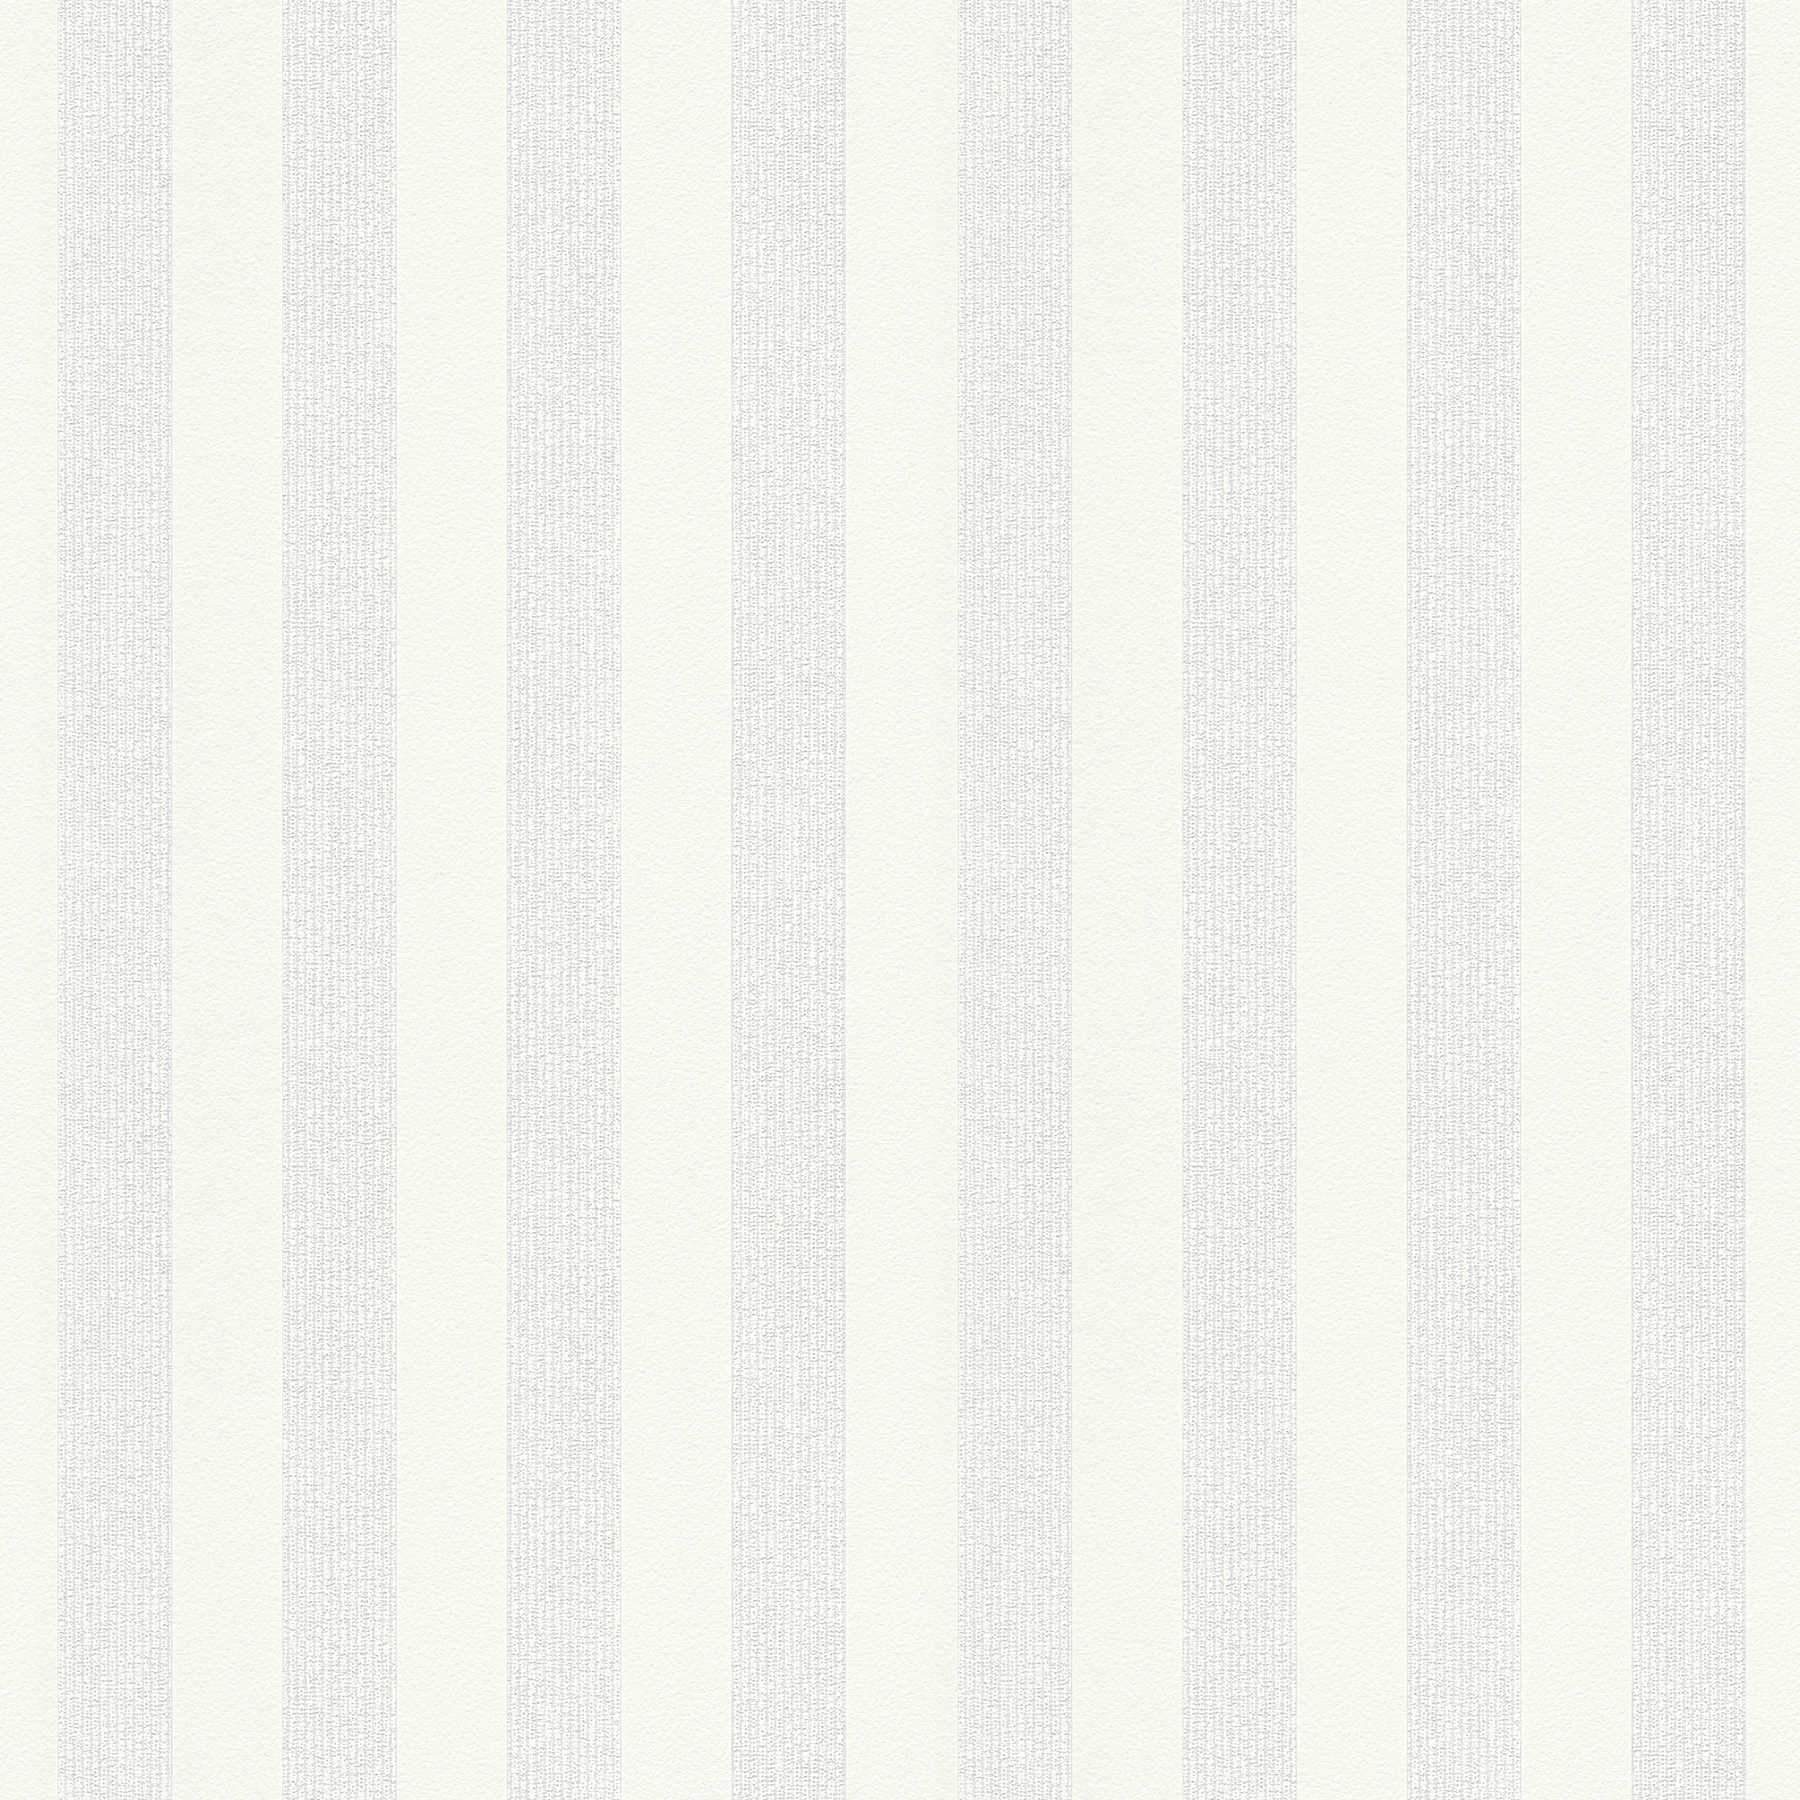 Structured wallpaper stripe pattern, textures - paintable, white
